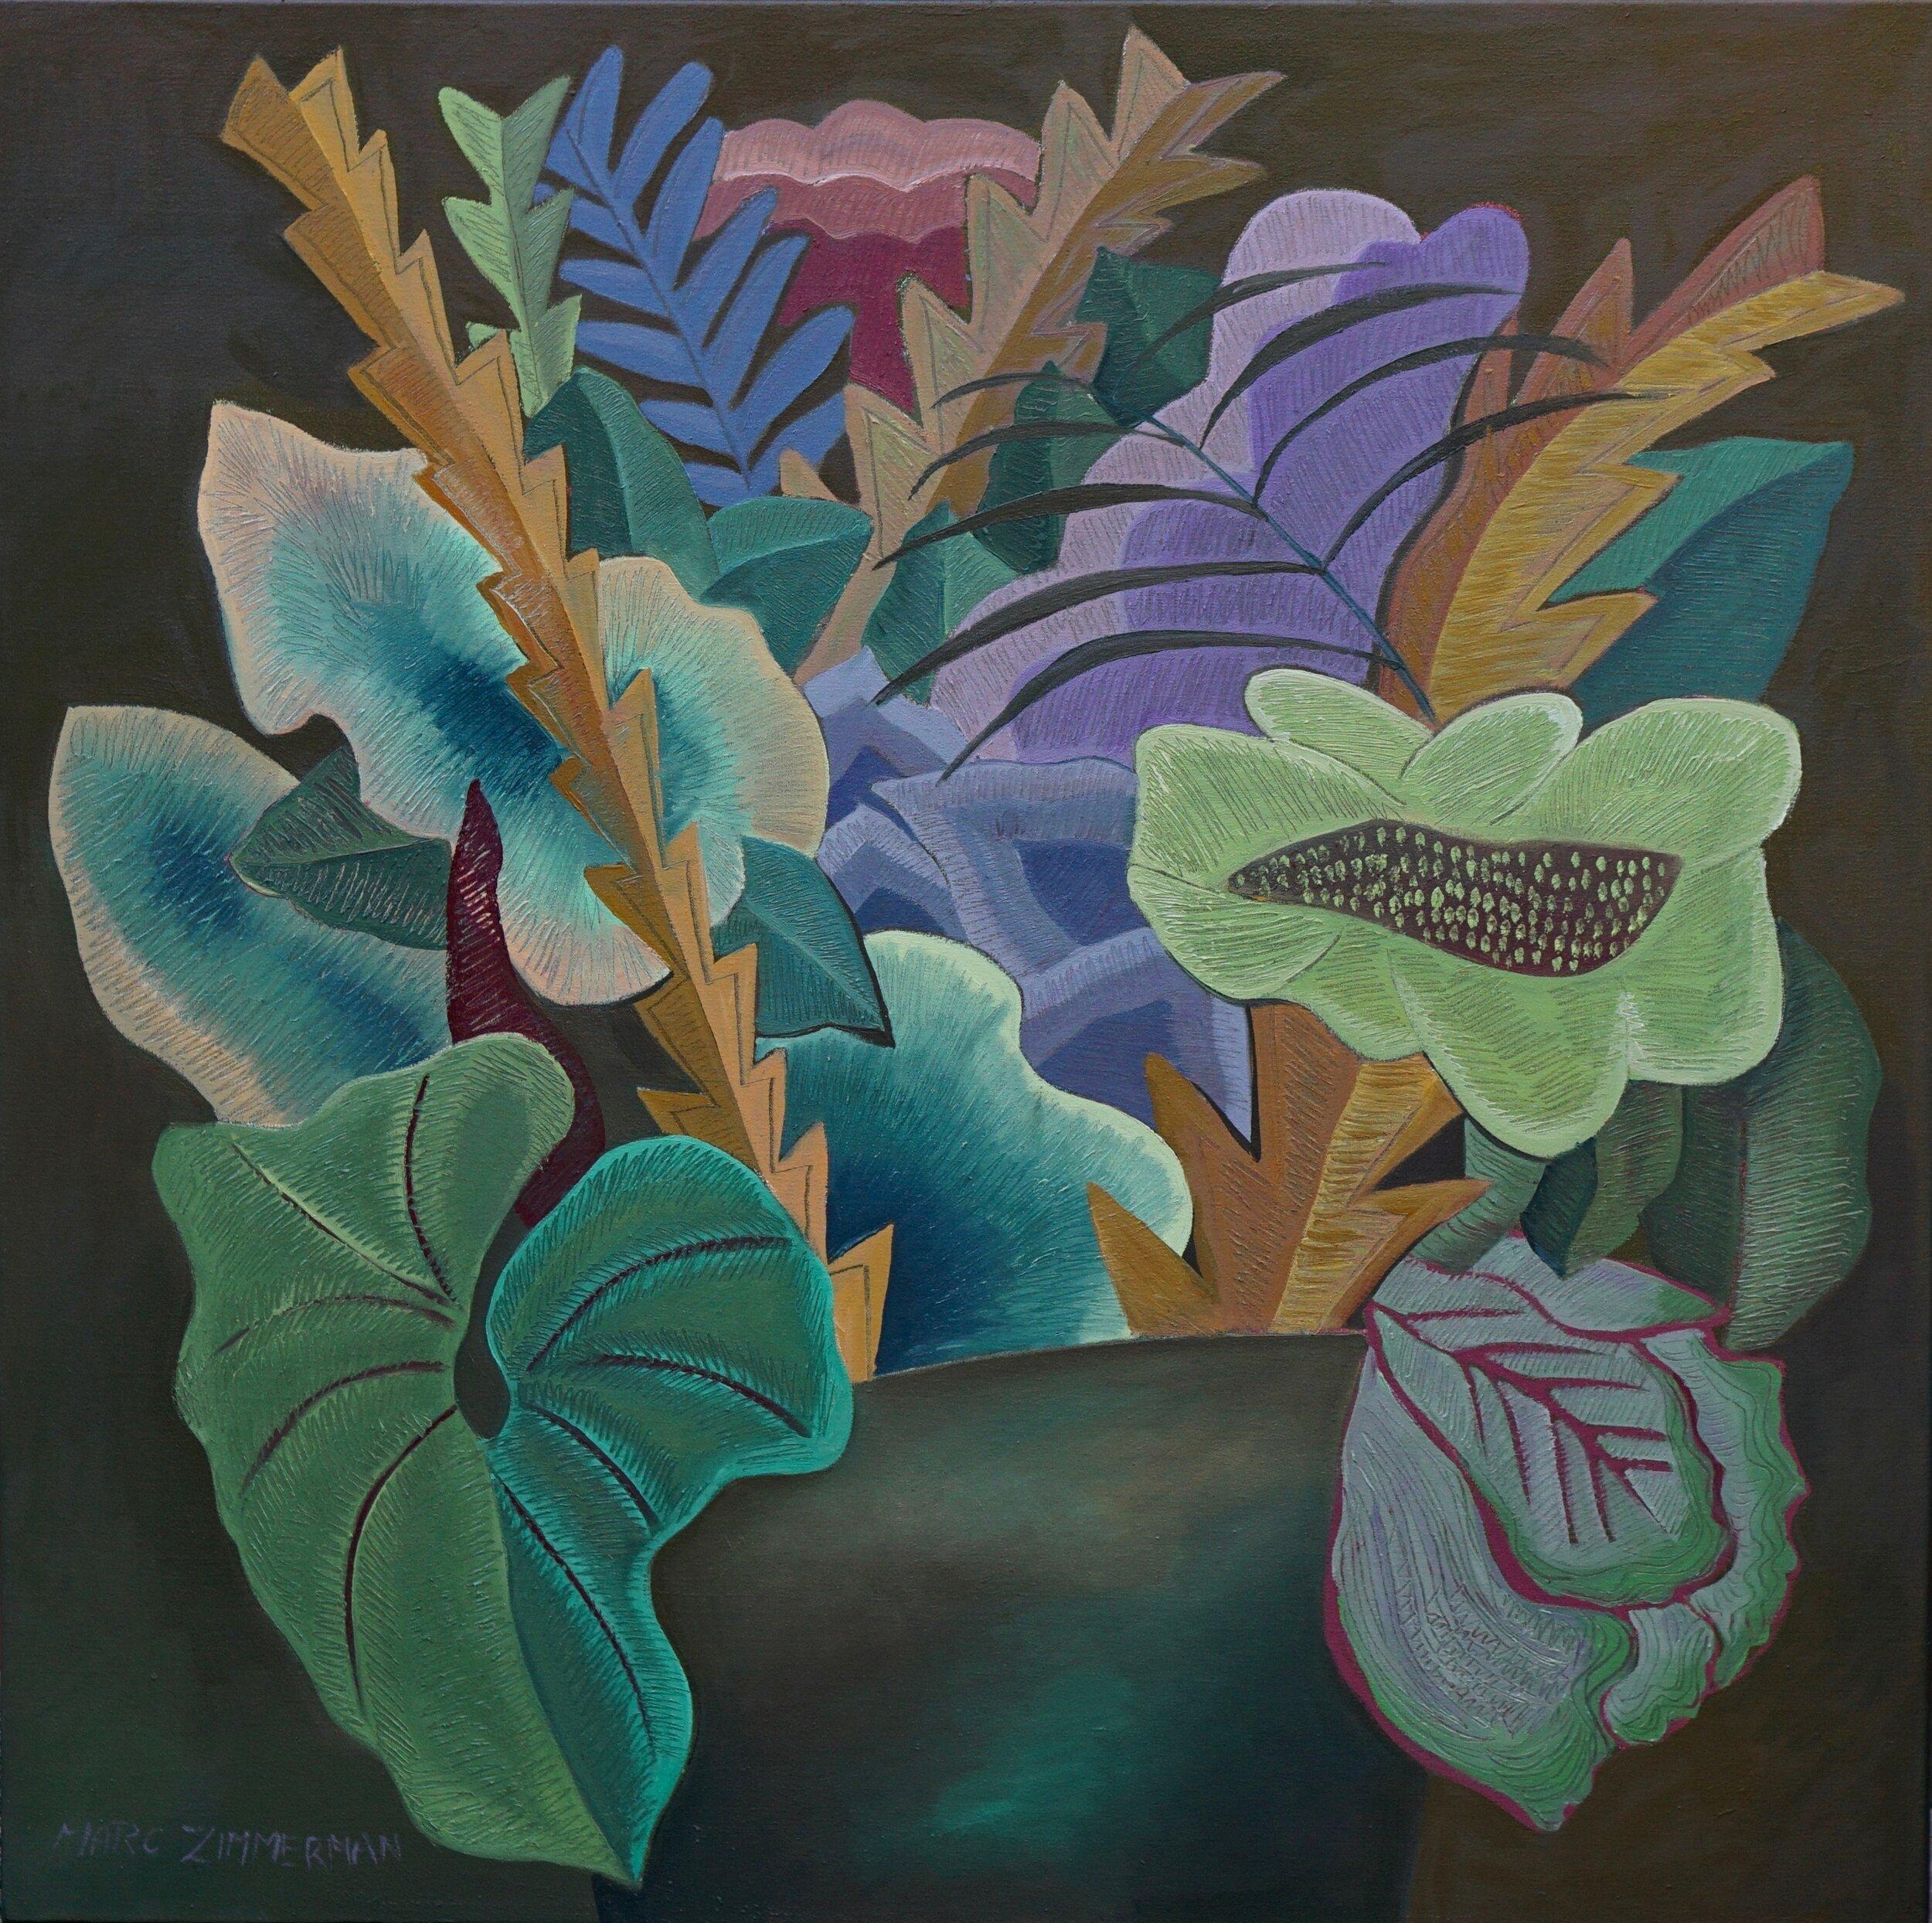 Floral wall art depicting the luxury and abundance of the tropical floral jenra with large overlapping inventive flowers

Tropical Fantasy Floral #2' Oil on Canvas By Marc Zimmerman

This masterpiece is exhibited in the Zimmerman Gallery, Carmel